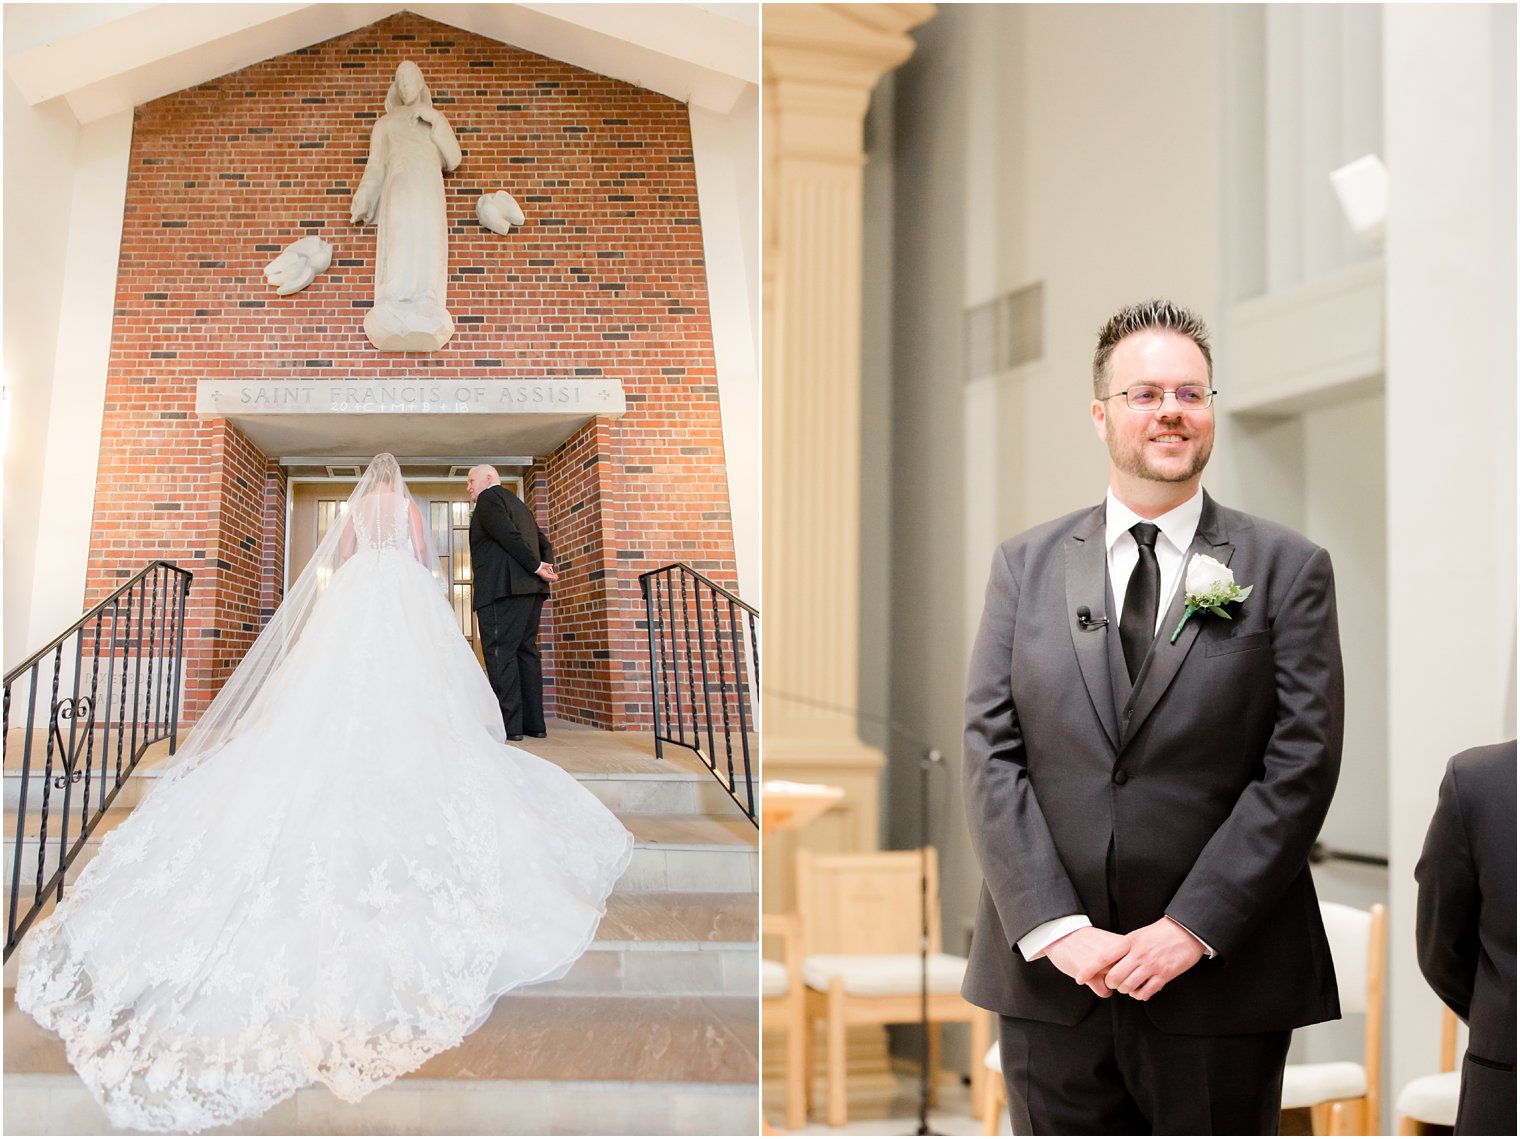 Bride enters Saint Francis of Assisi while groom waits at end of aisle by Idalia Photography